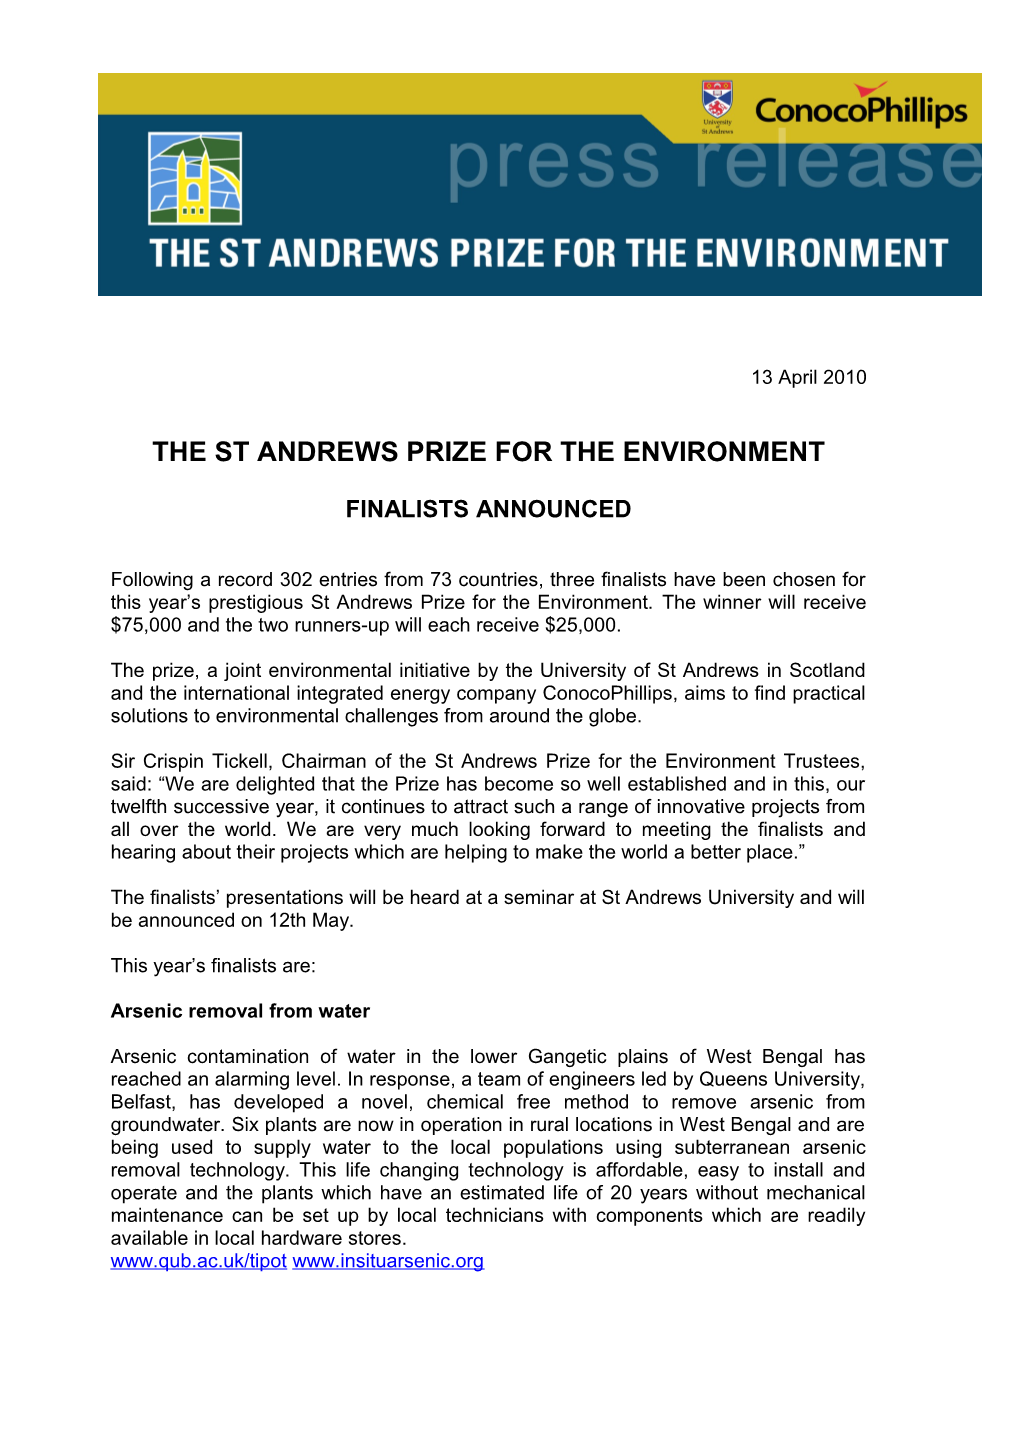 The St Andrews Prize for the Environment